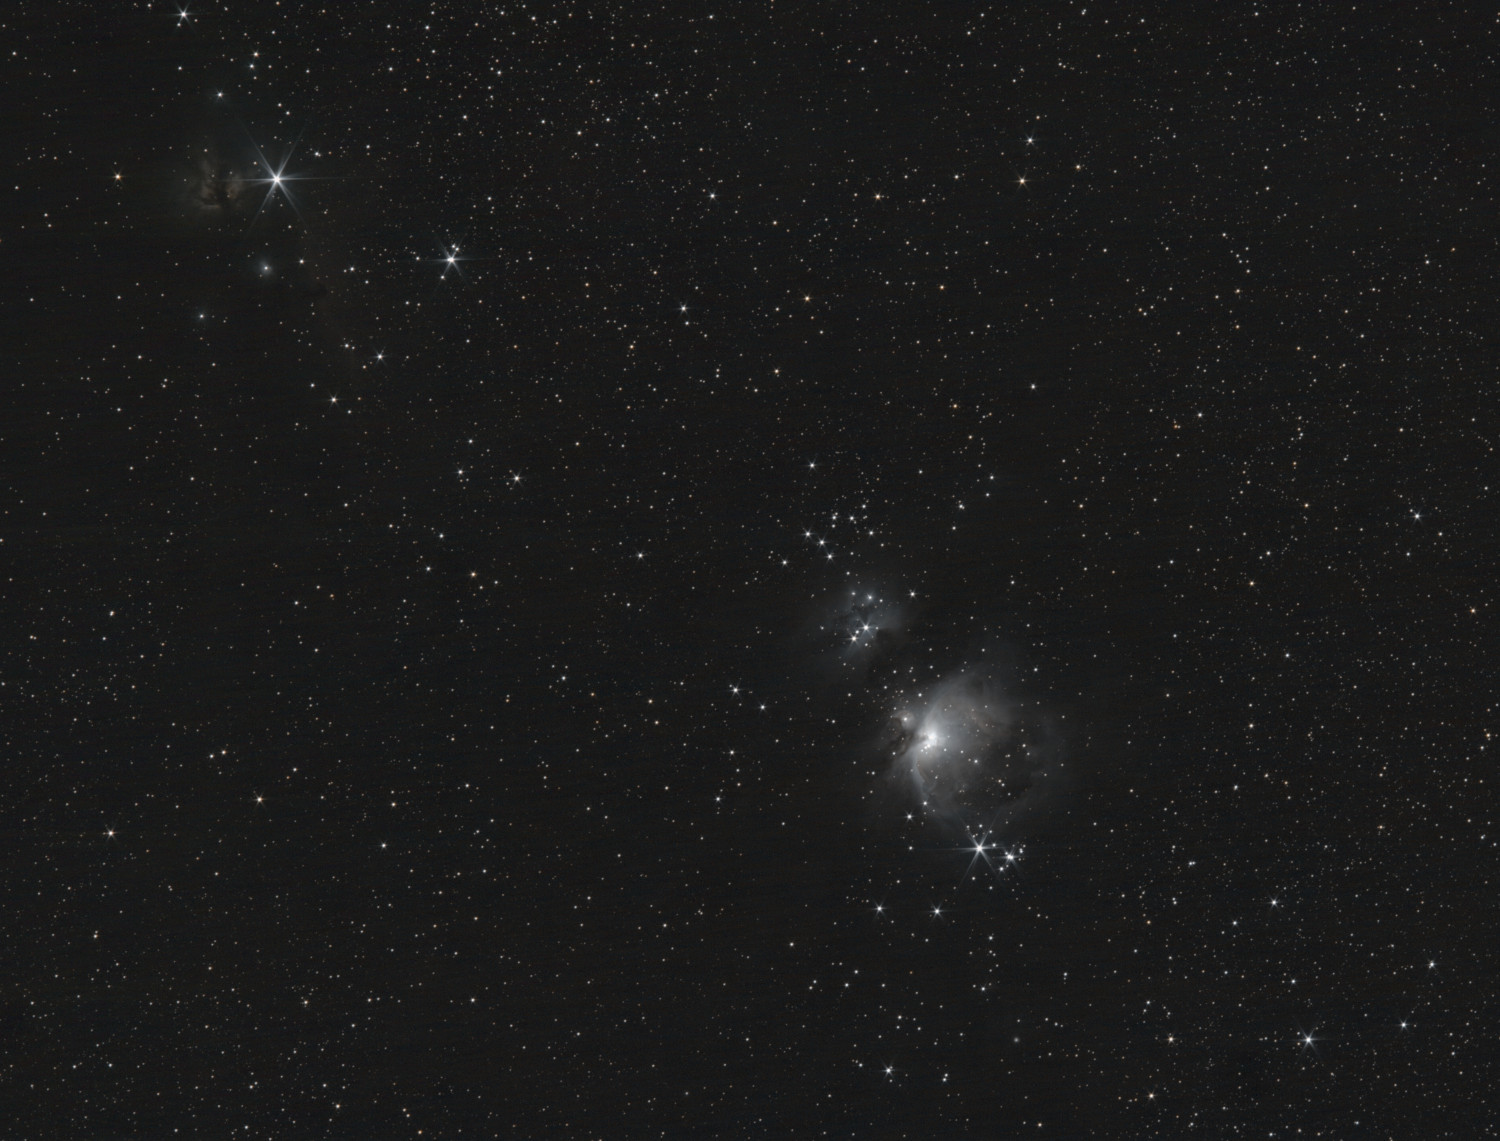 Orion wide